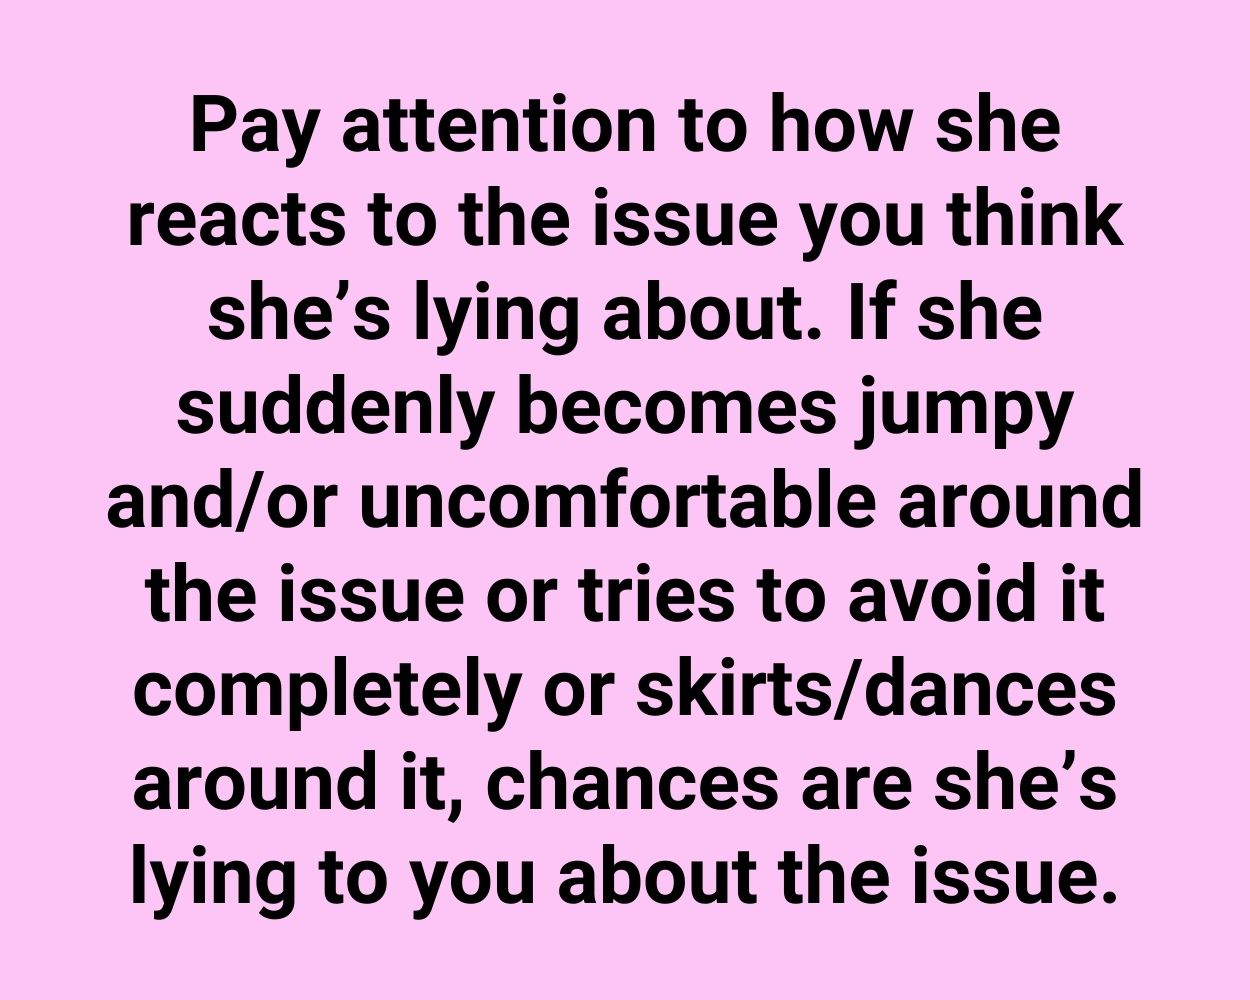 Pay attention to how she reacts to the issue you think she’s lying about. If she suddenly becomes jumpy and/or uncomfortable around the issue or tries to avoid it completely or skirts/dances around it, chances are she’s lying to you about the issue.